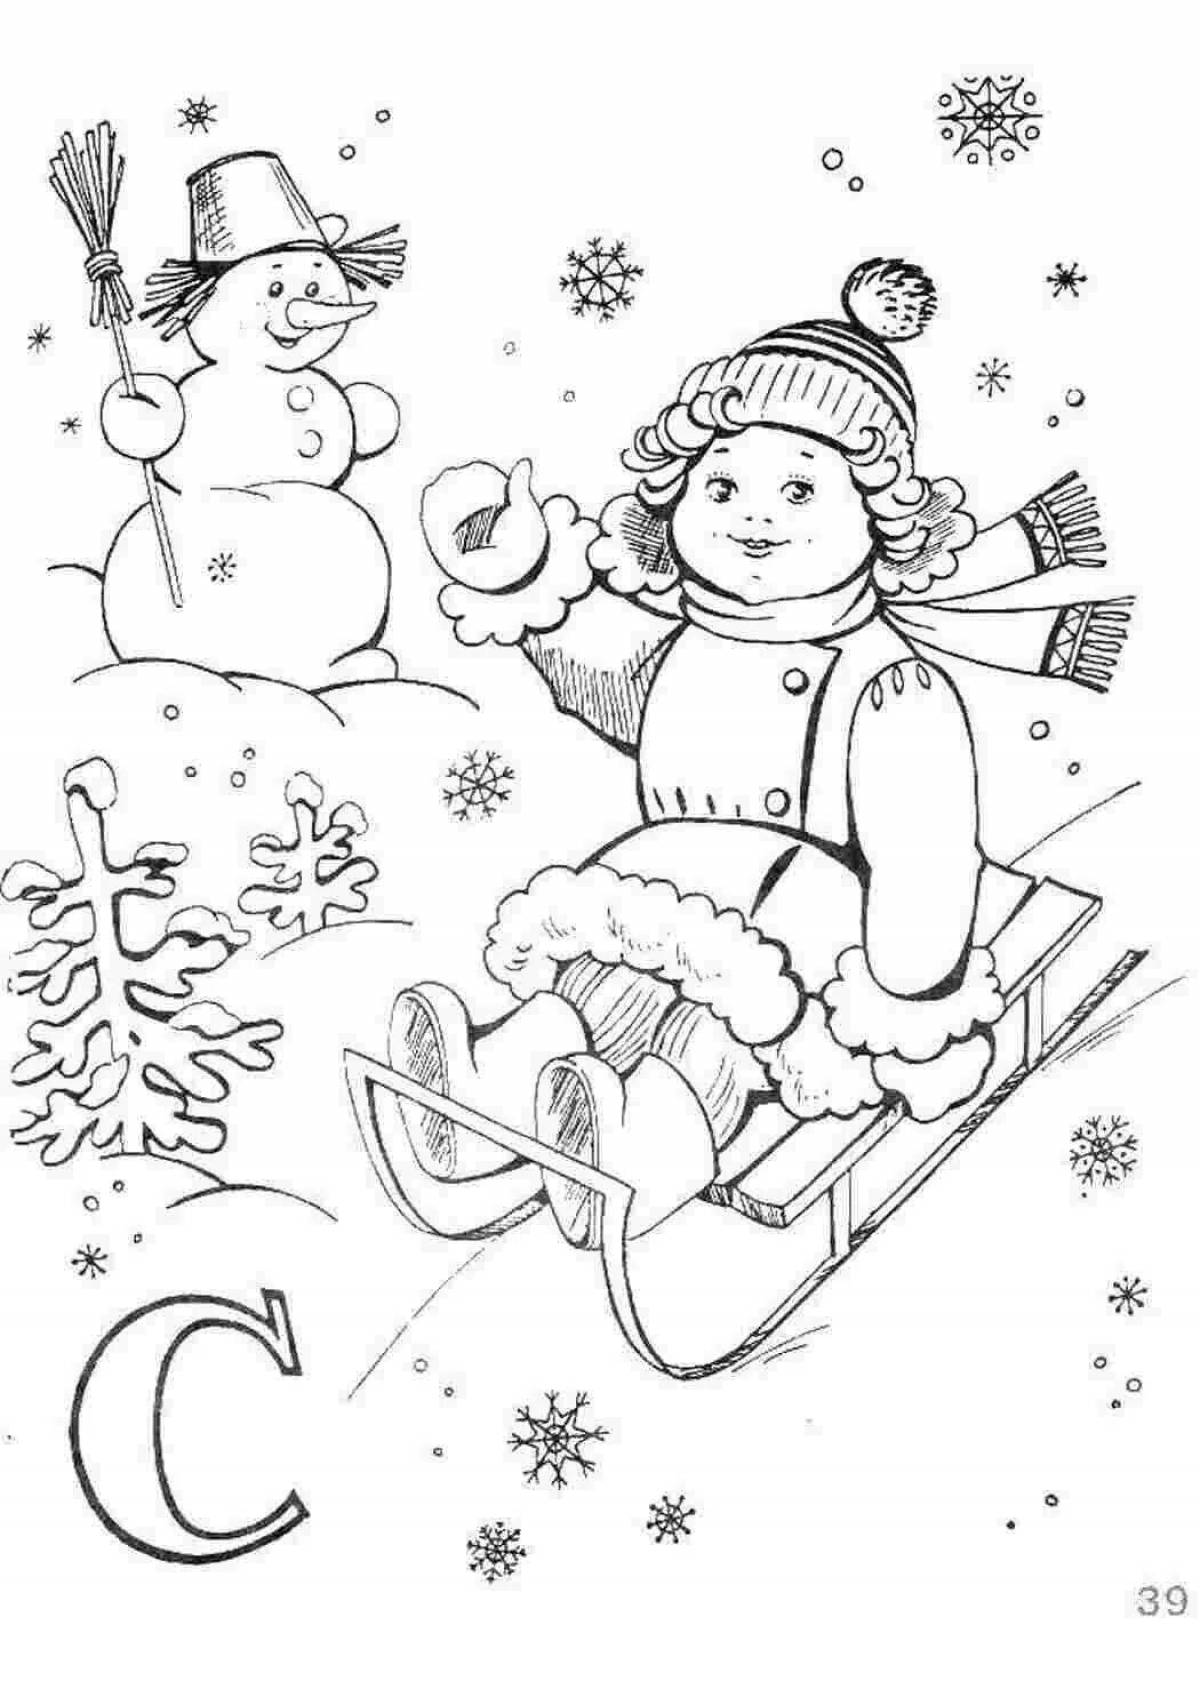 Sweet December coloring book for kids